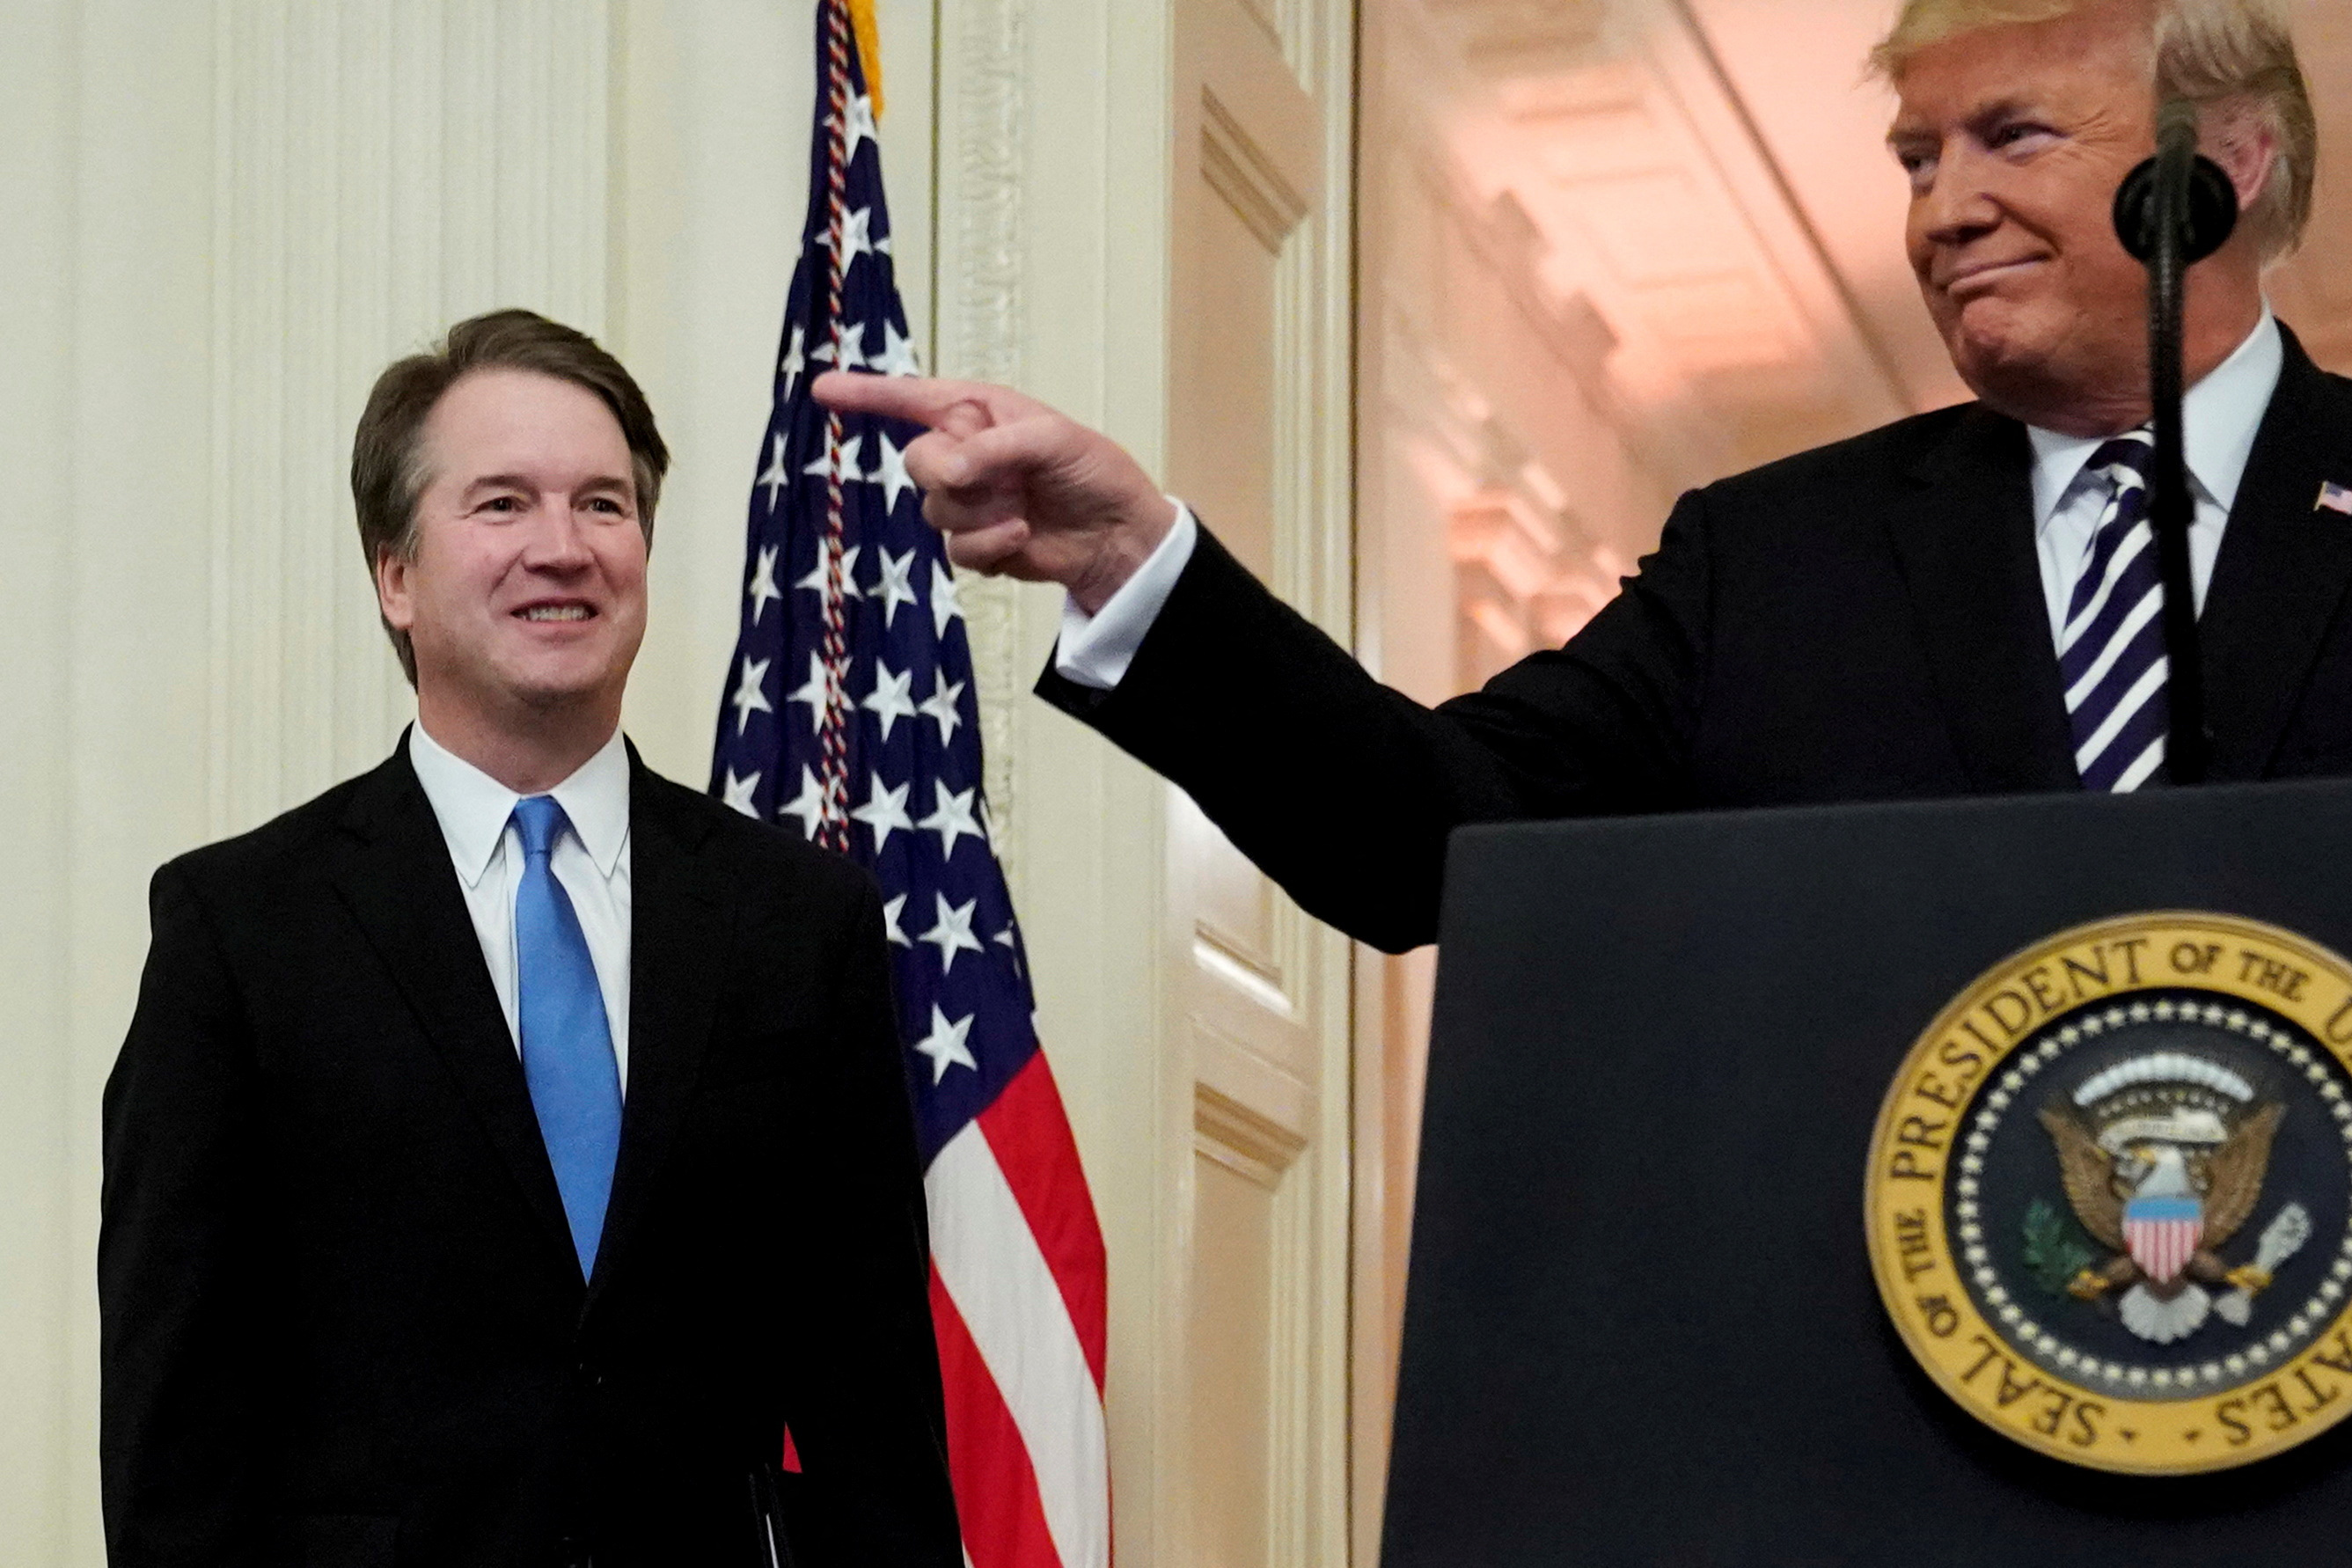 U.S. President Donald Trump speaks next to U.S. Supreme Court Associate Justice Brett Kavanaugh as they participate in a ceremonial public swearing-in at the East Room of the White House in Washington